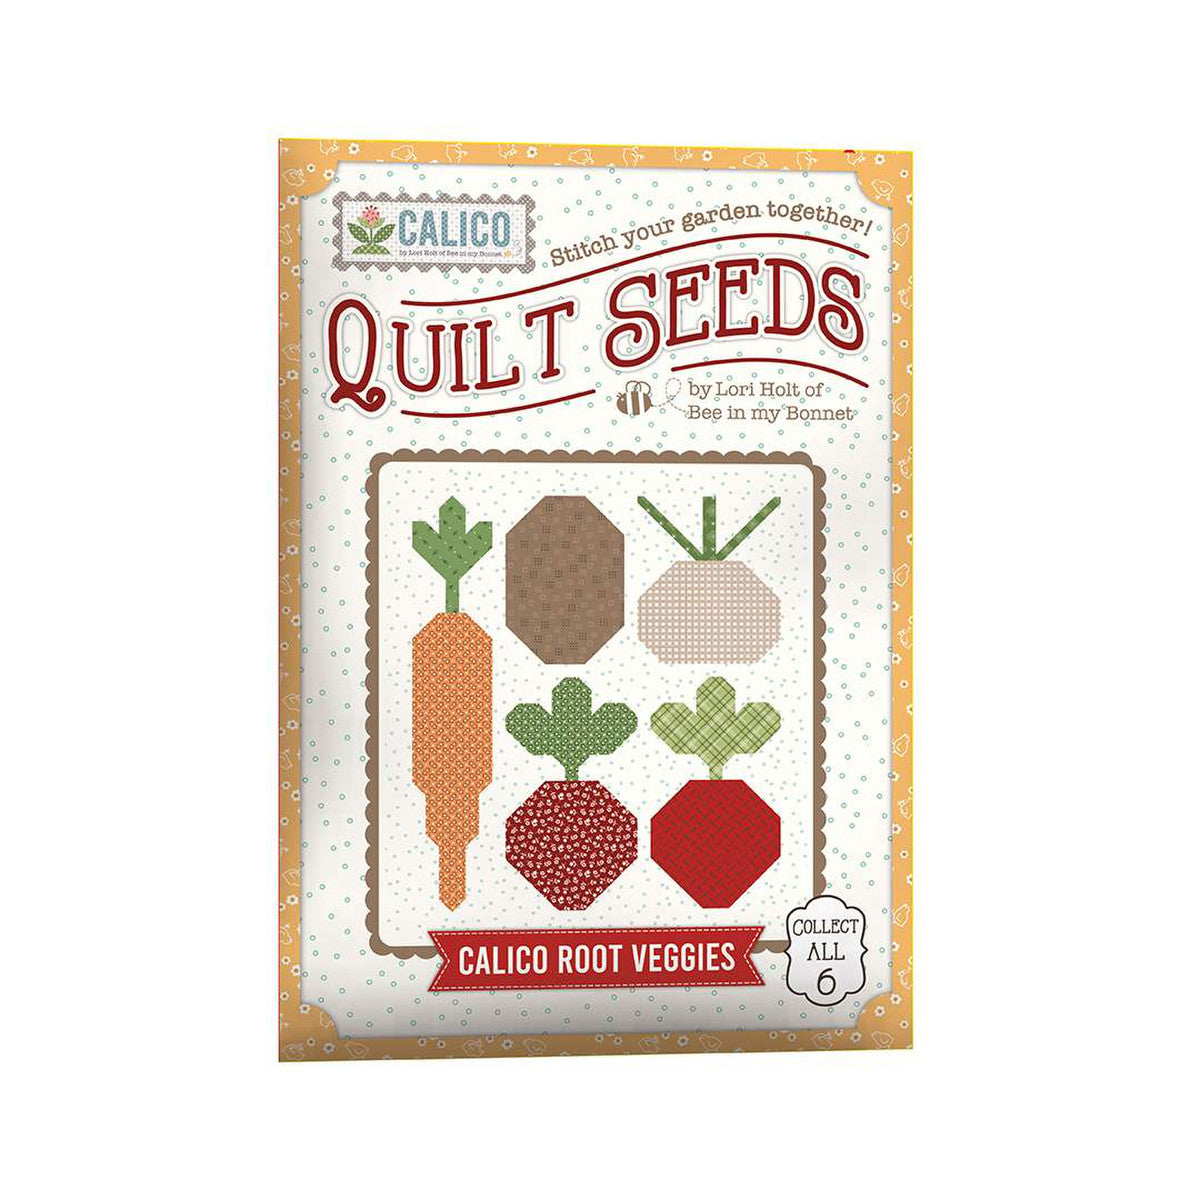 PATTERN, ROOT VEGGIES (Calico Quilt Seeds) Quilt Pattern by Lori Holt